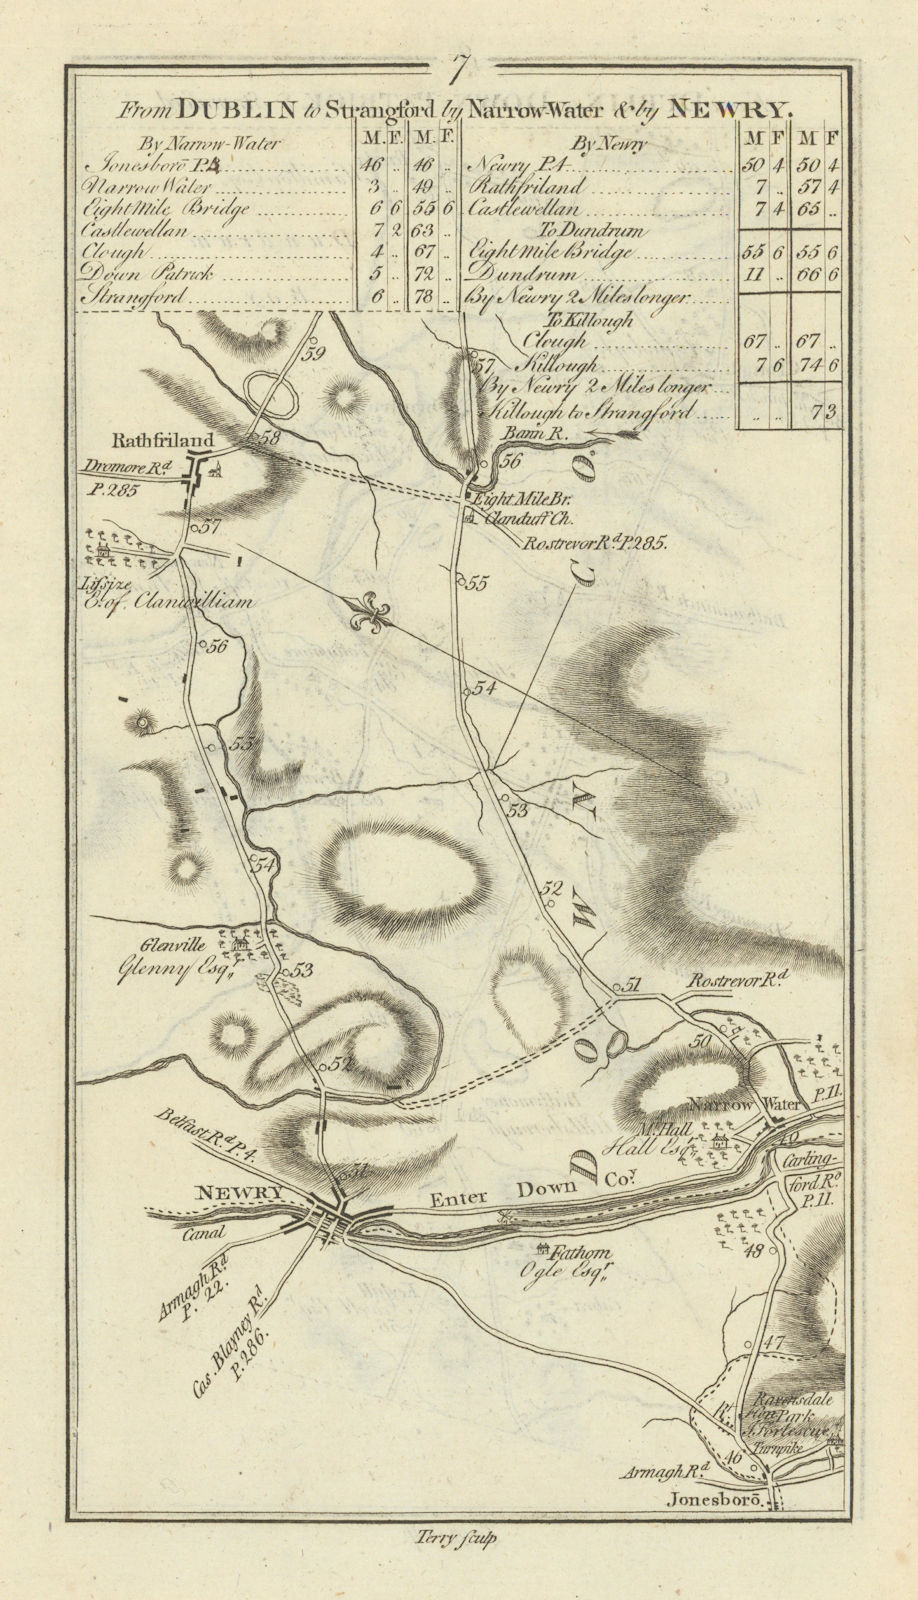 Associate Product #7 Dublin to Strangford by… Newry. Rathfriland. TAYLOR/SKINNER 1778 old map